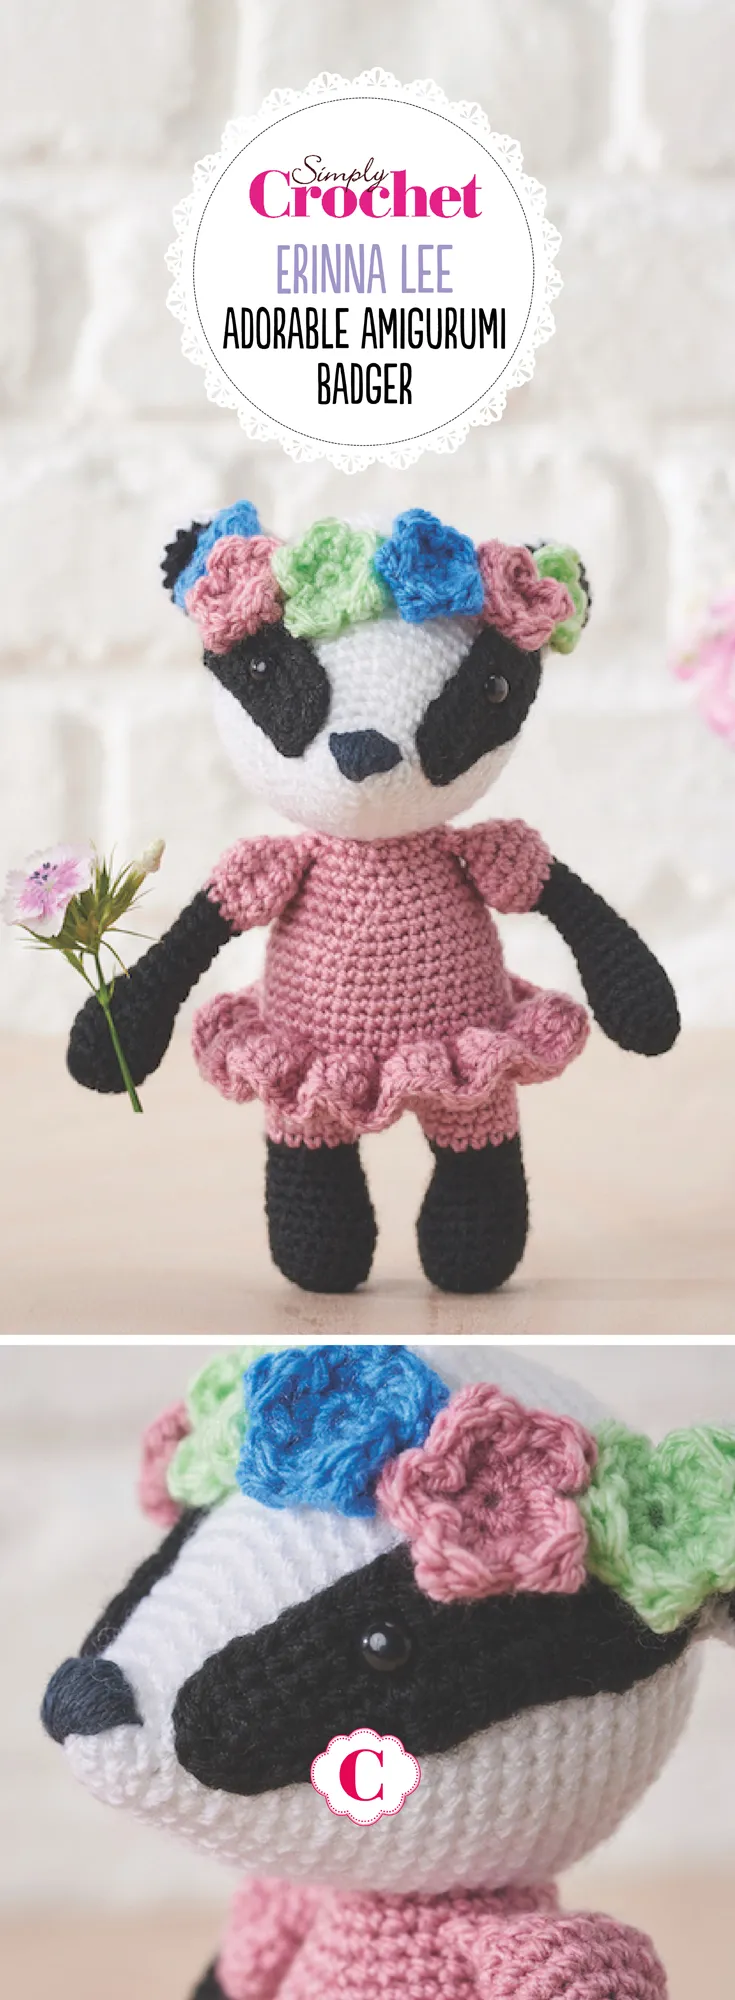 Simply_Crochet_issue75_Badger.pin